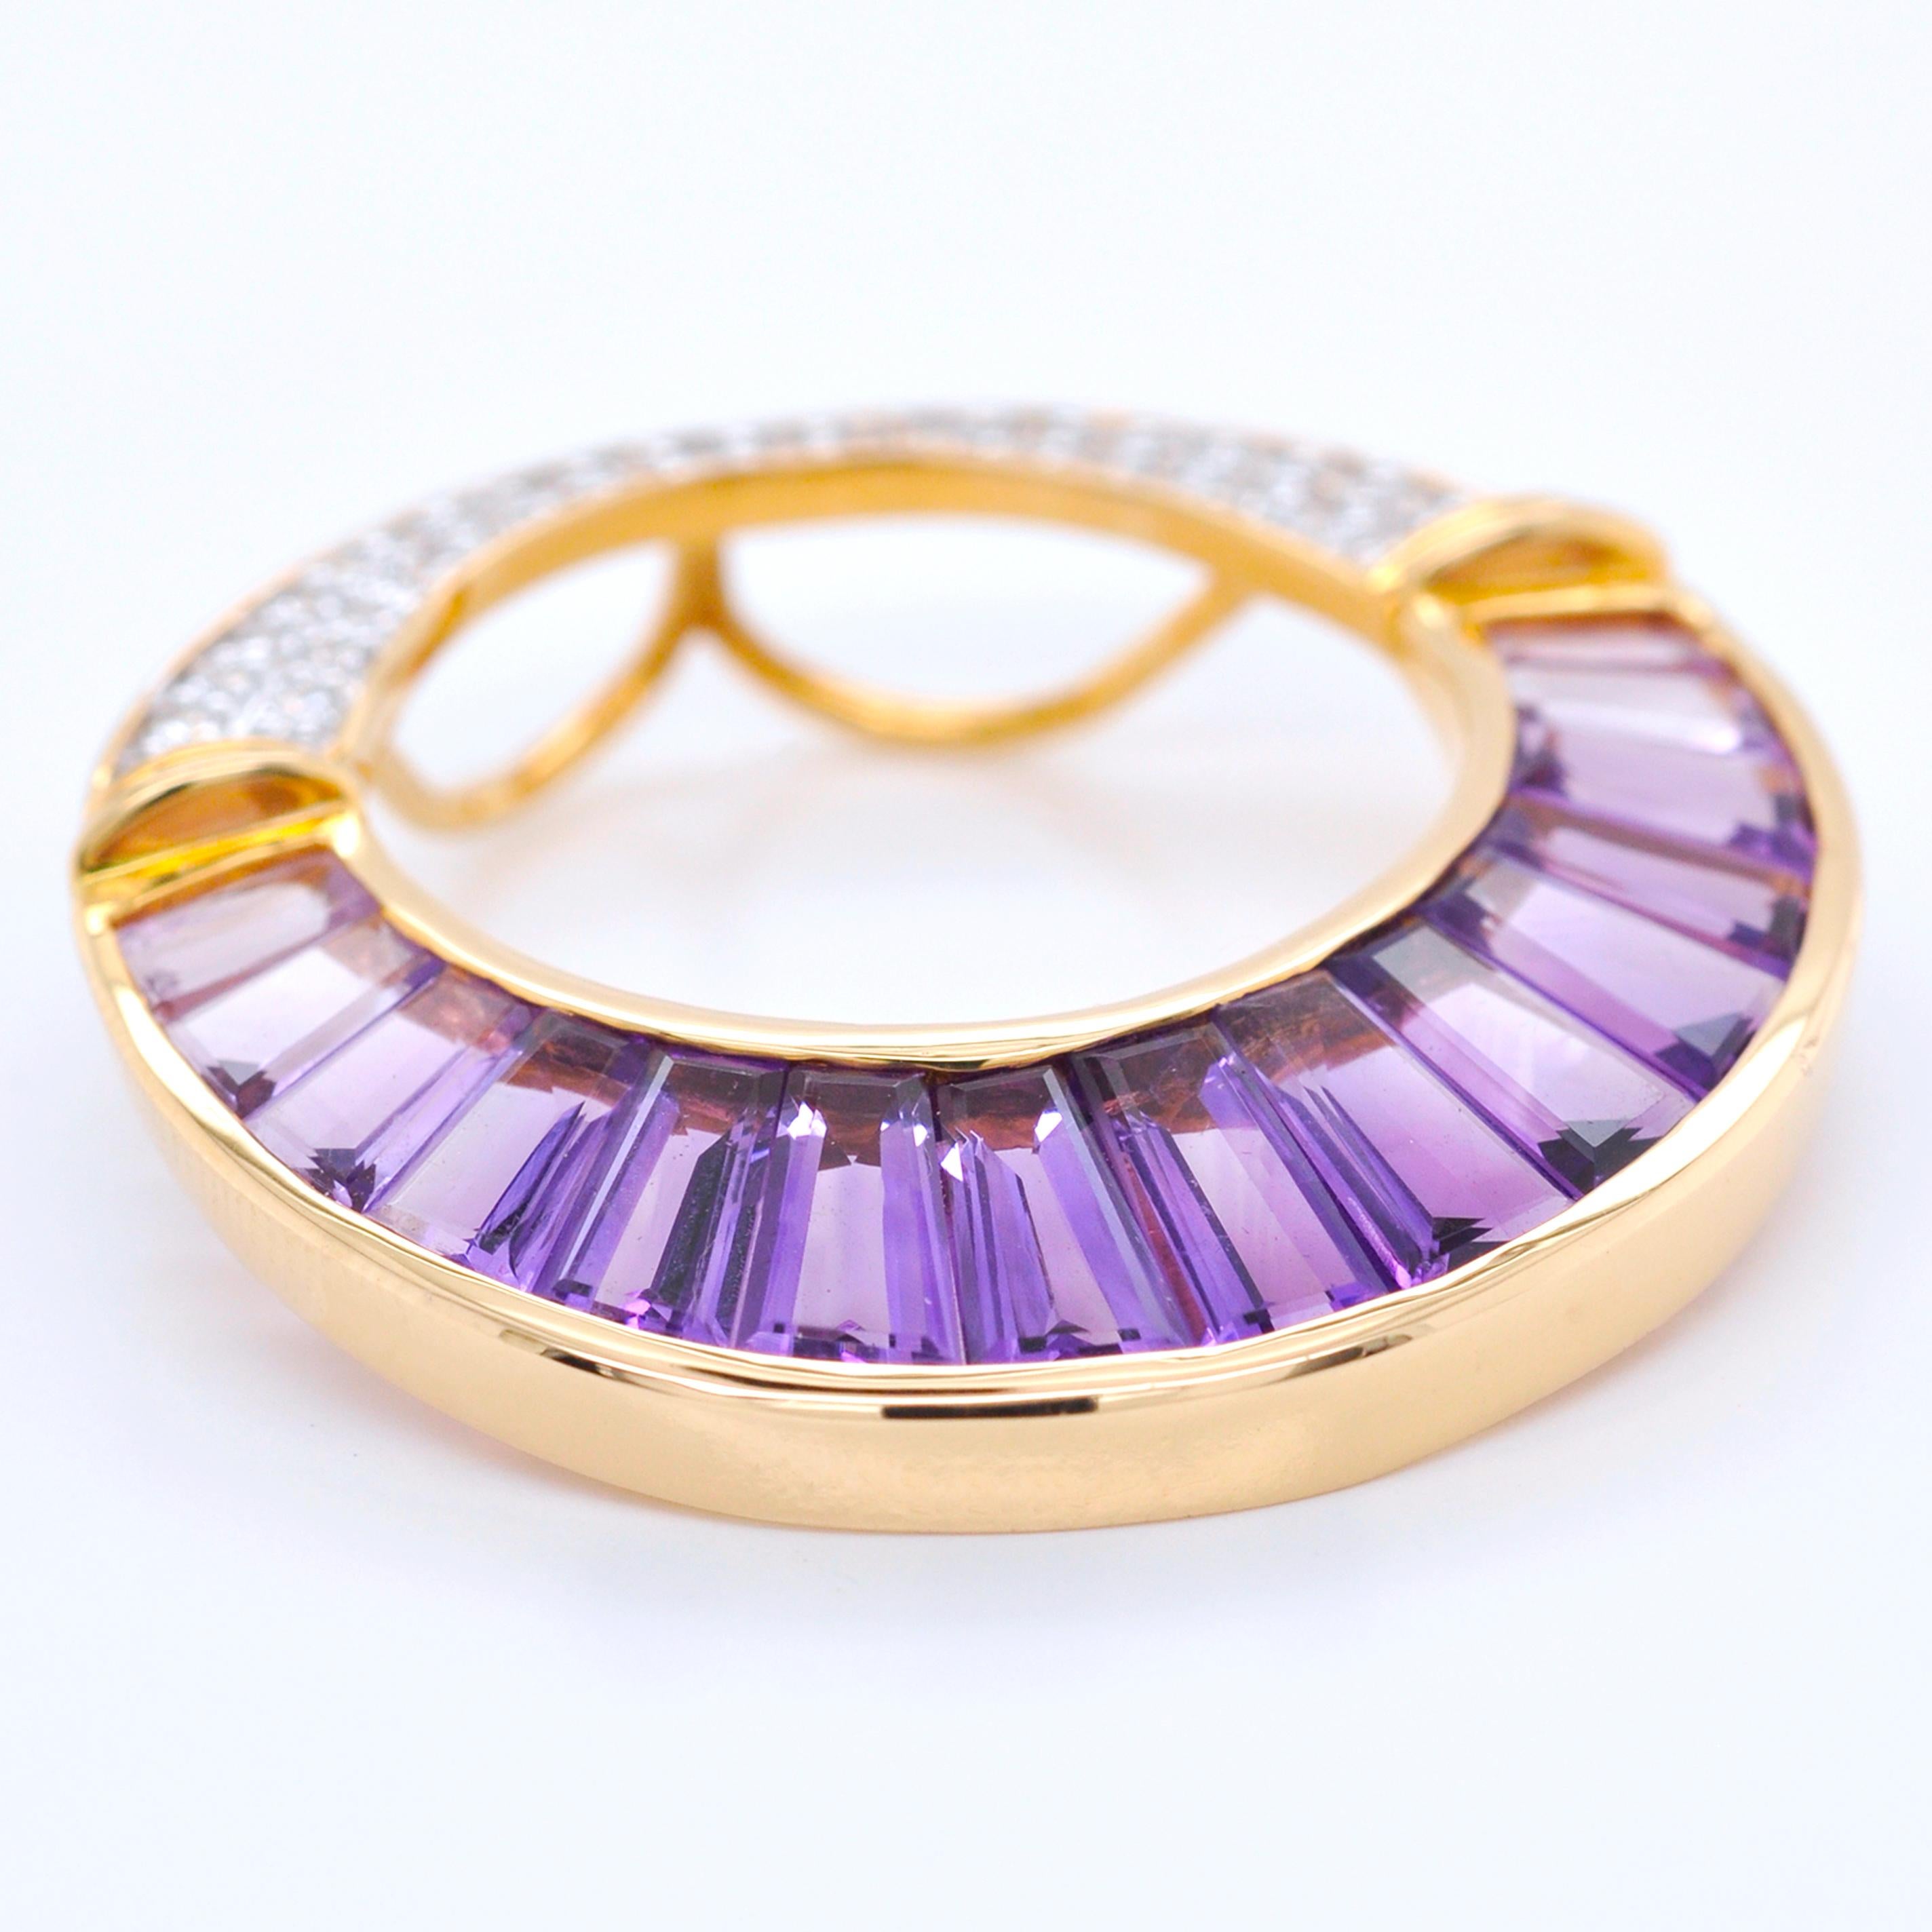 18 Karat Gold Calibre Cut Amethyst Baguette Diamond Pendant Necklace Brooch In New Condition For Sale In Jaipur, Rajasthan